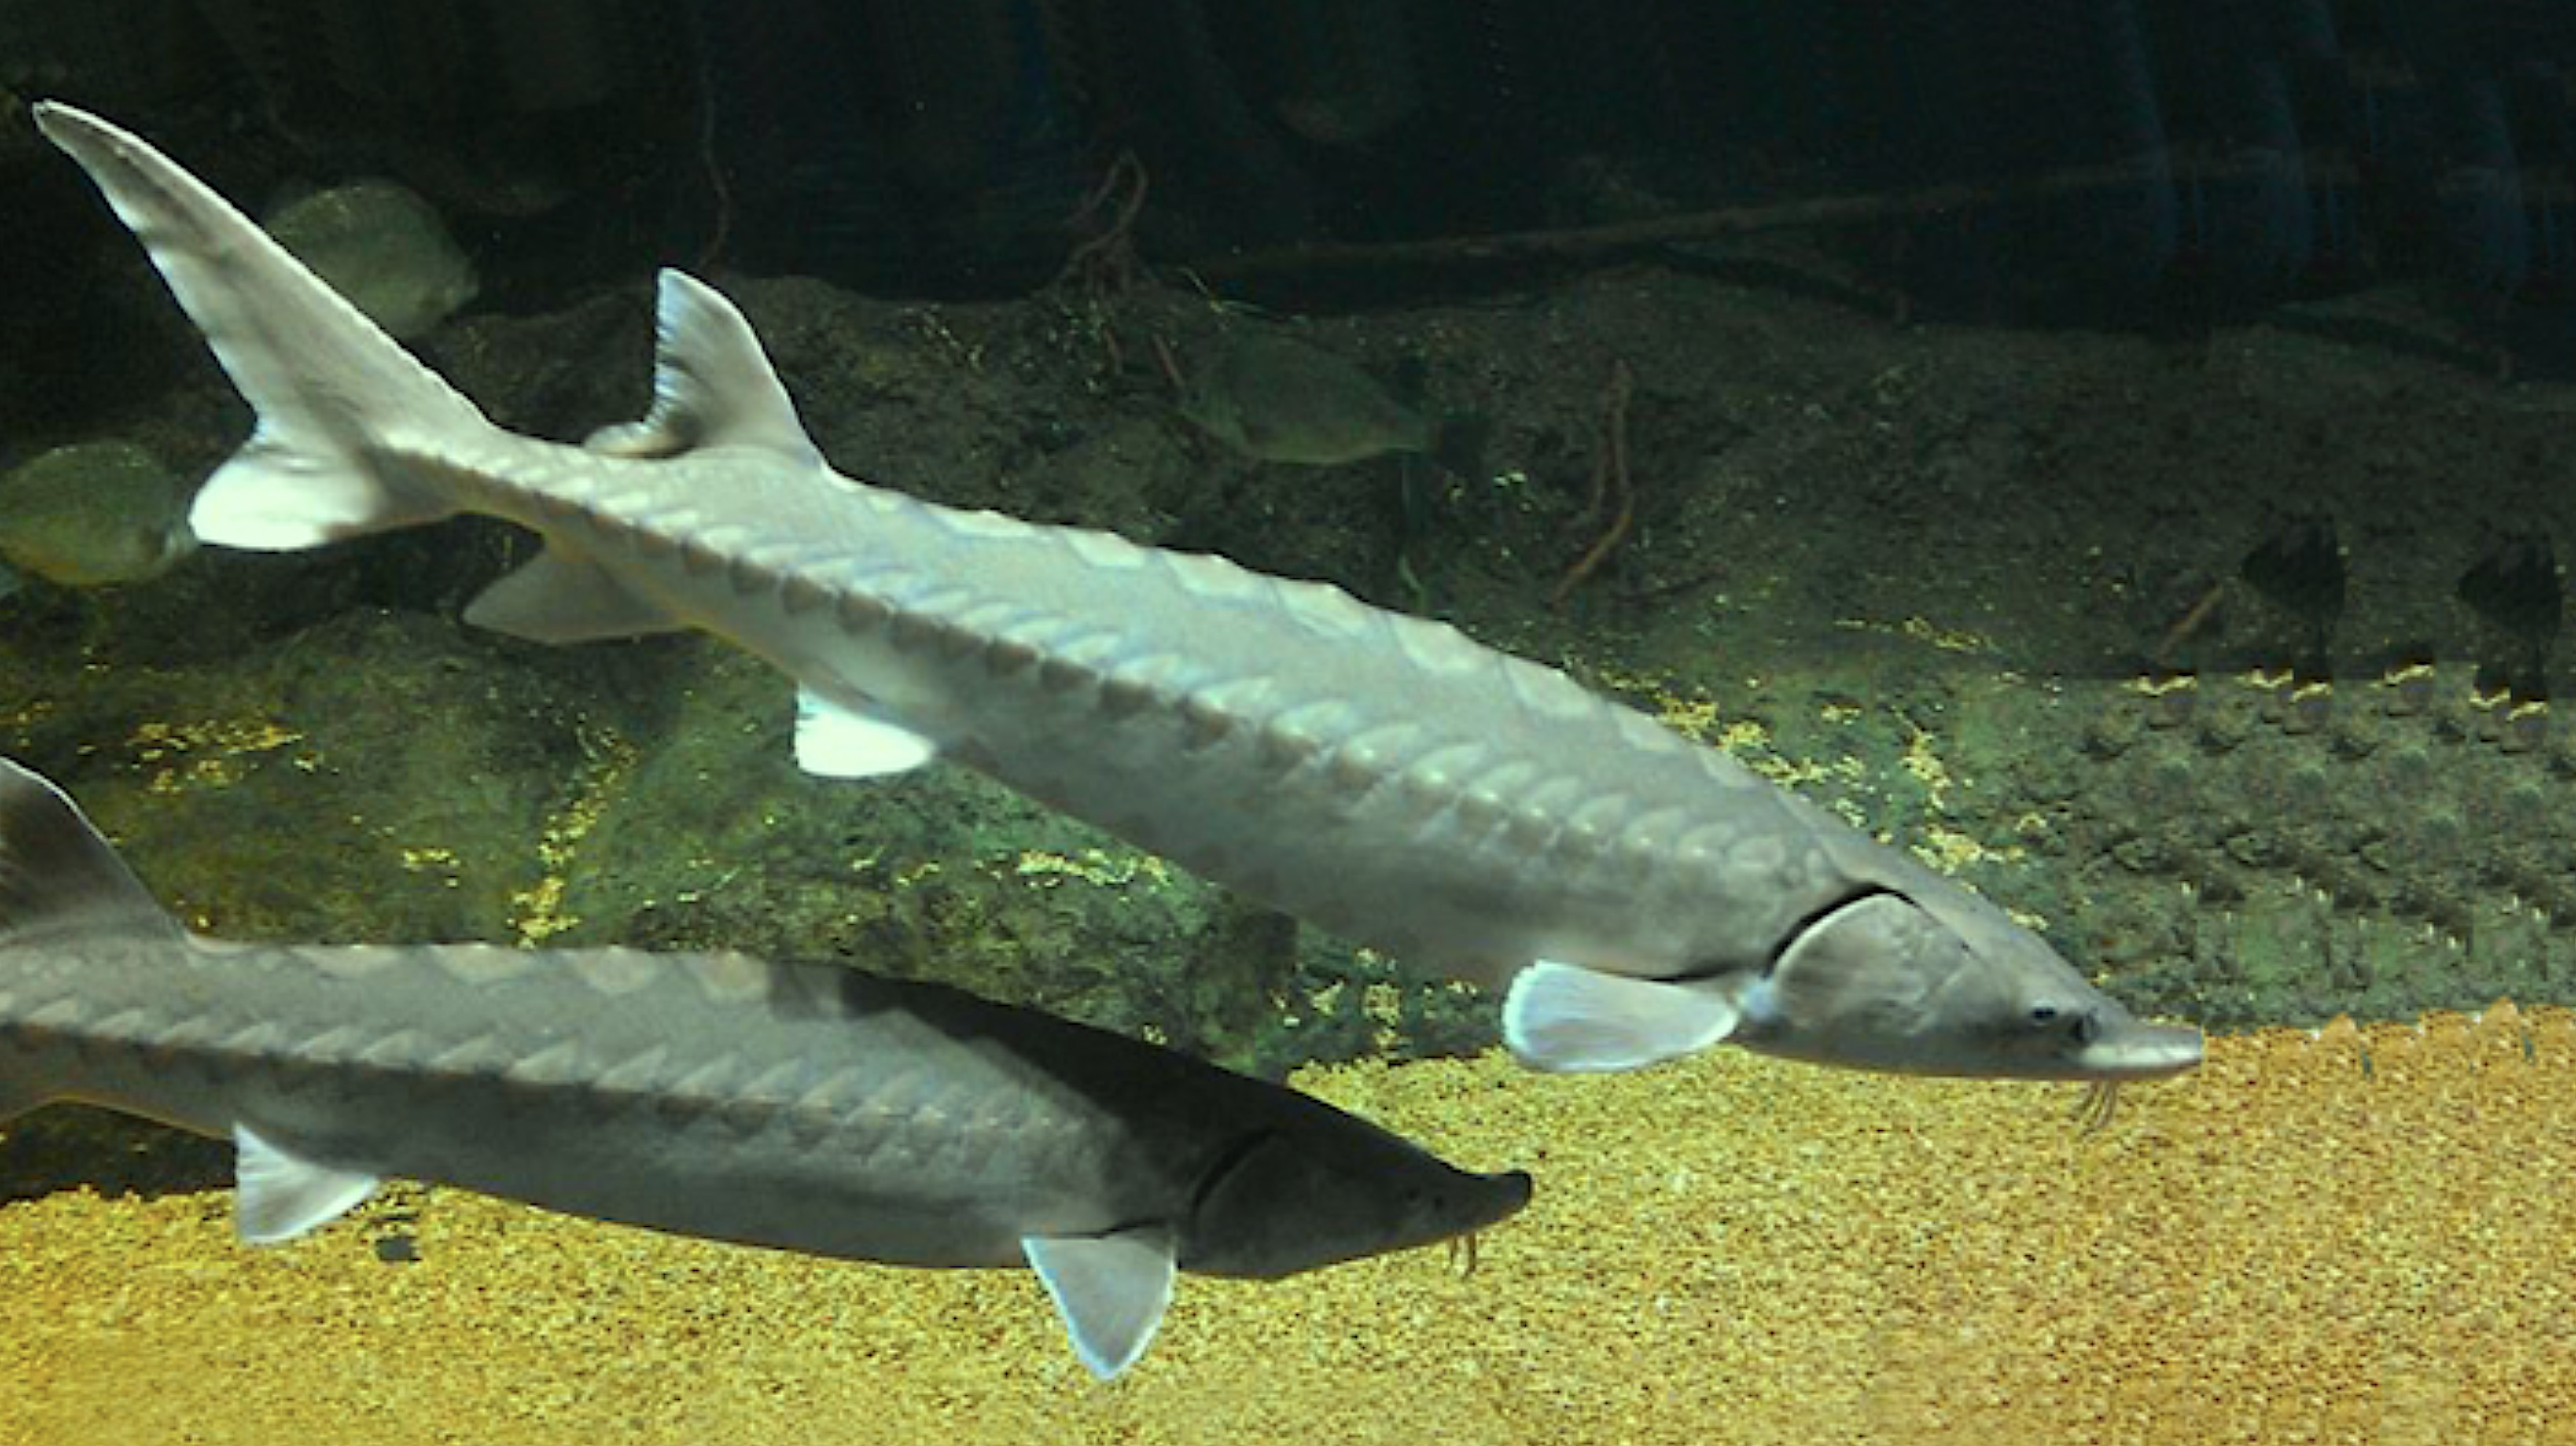 Off-the-shelf side-scan sonar can monitor daily abundance of spawning Atlantic sturgeon in shallow river systems. Photo courtesy of NOAA.